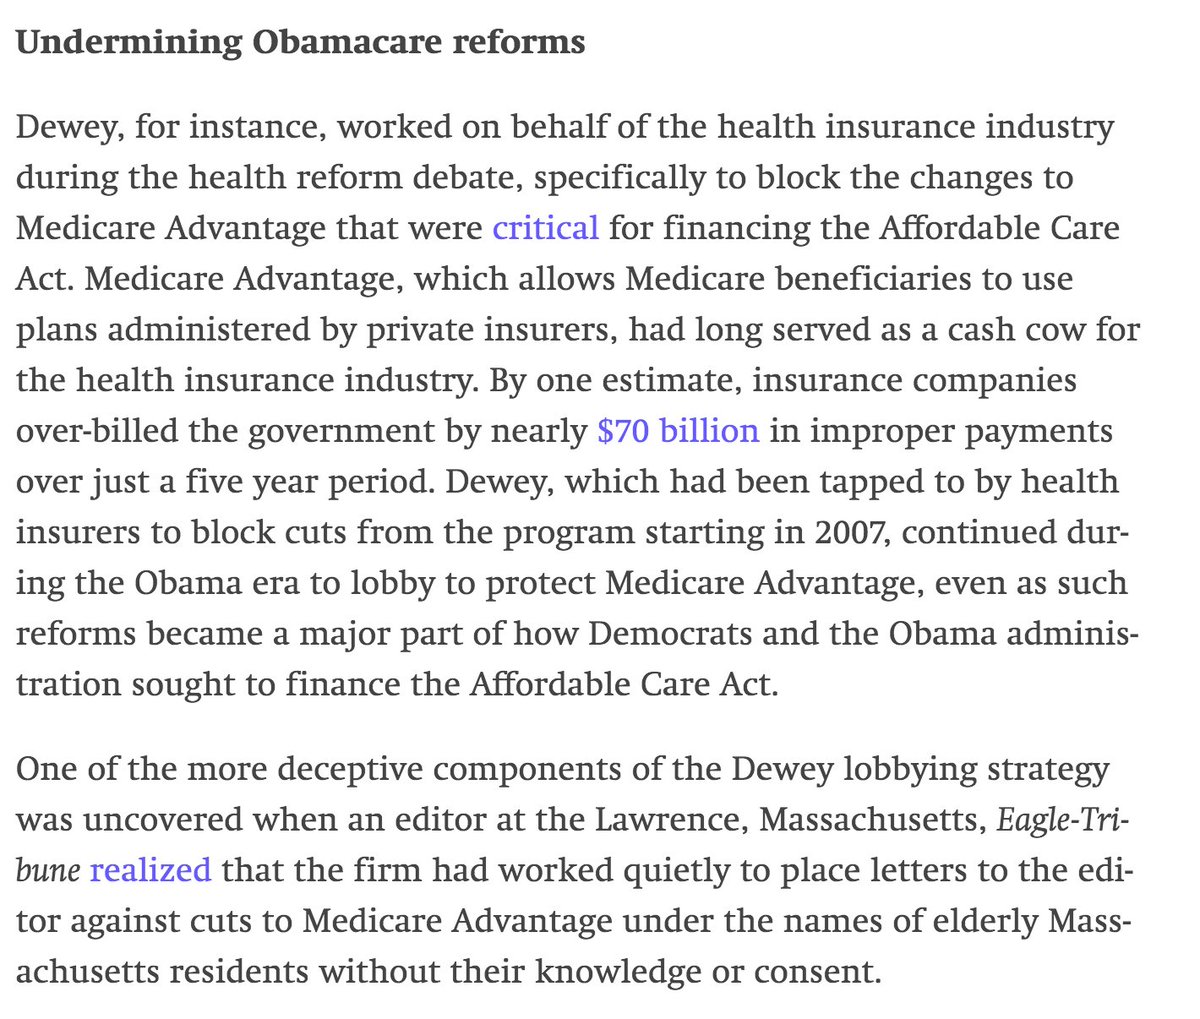 From 2016  @theintercept story: Dewey Square Group worked on behalf of health insurance industry during health reform debate, even placing letters to editor in newspaper "under names of elderly Massachusetts residents without their knowledge or consent." https://theintercept.com/2016/02/08/hrc-inner-circle-lobbyists/